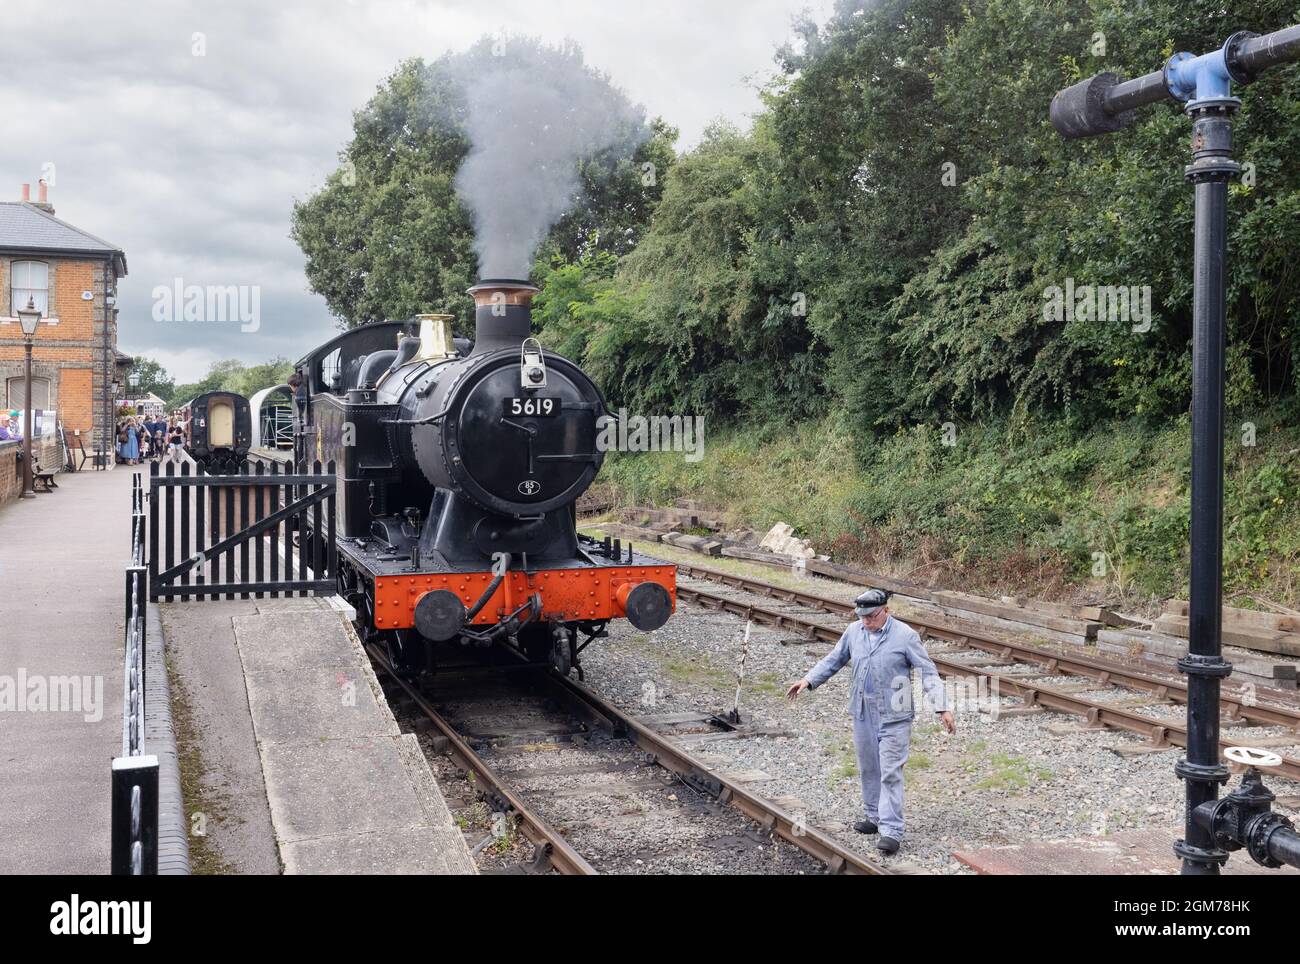 Vintage train;  steam engine manoeuvring in North Weald Station, Epping Ongar railway, a heritage railway, Epping Essex UK Stock Photo